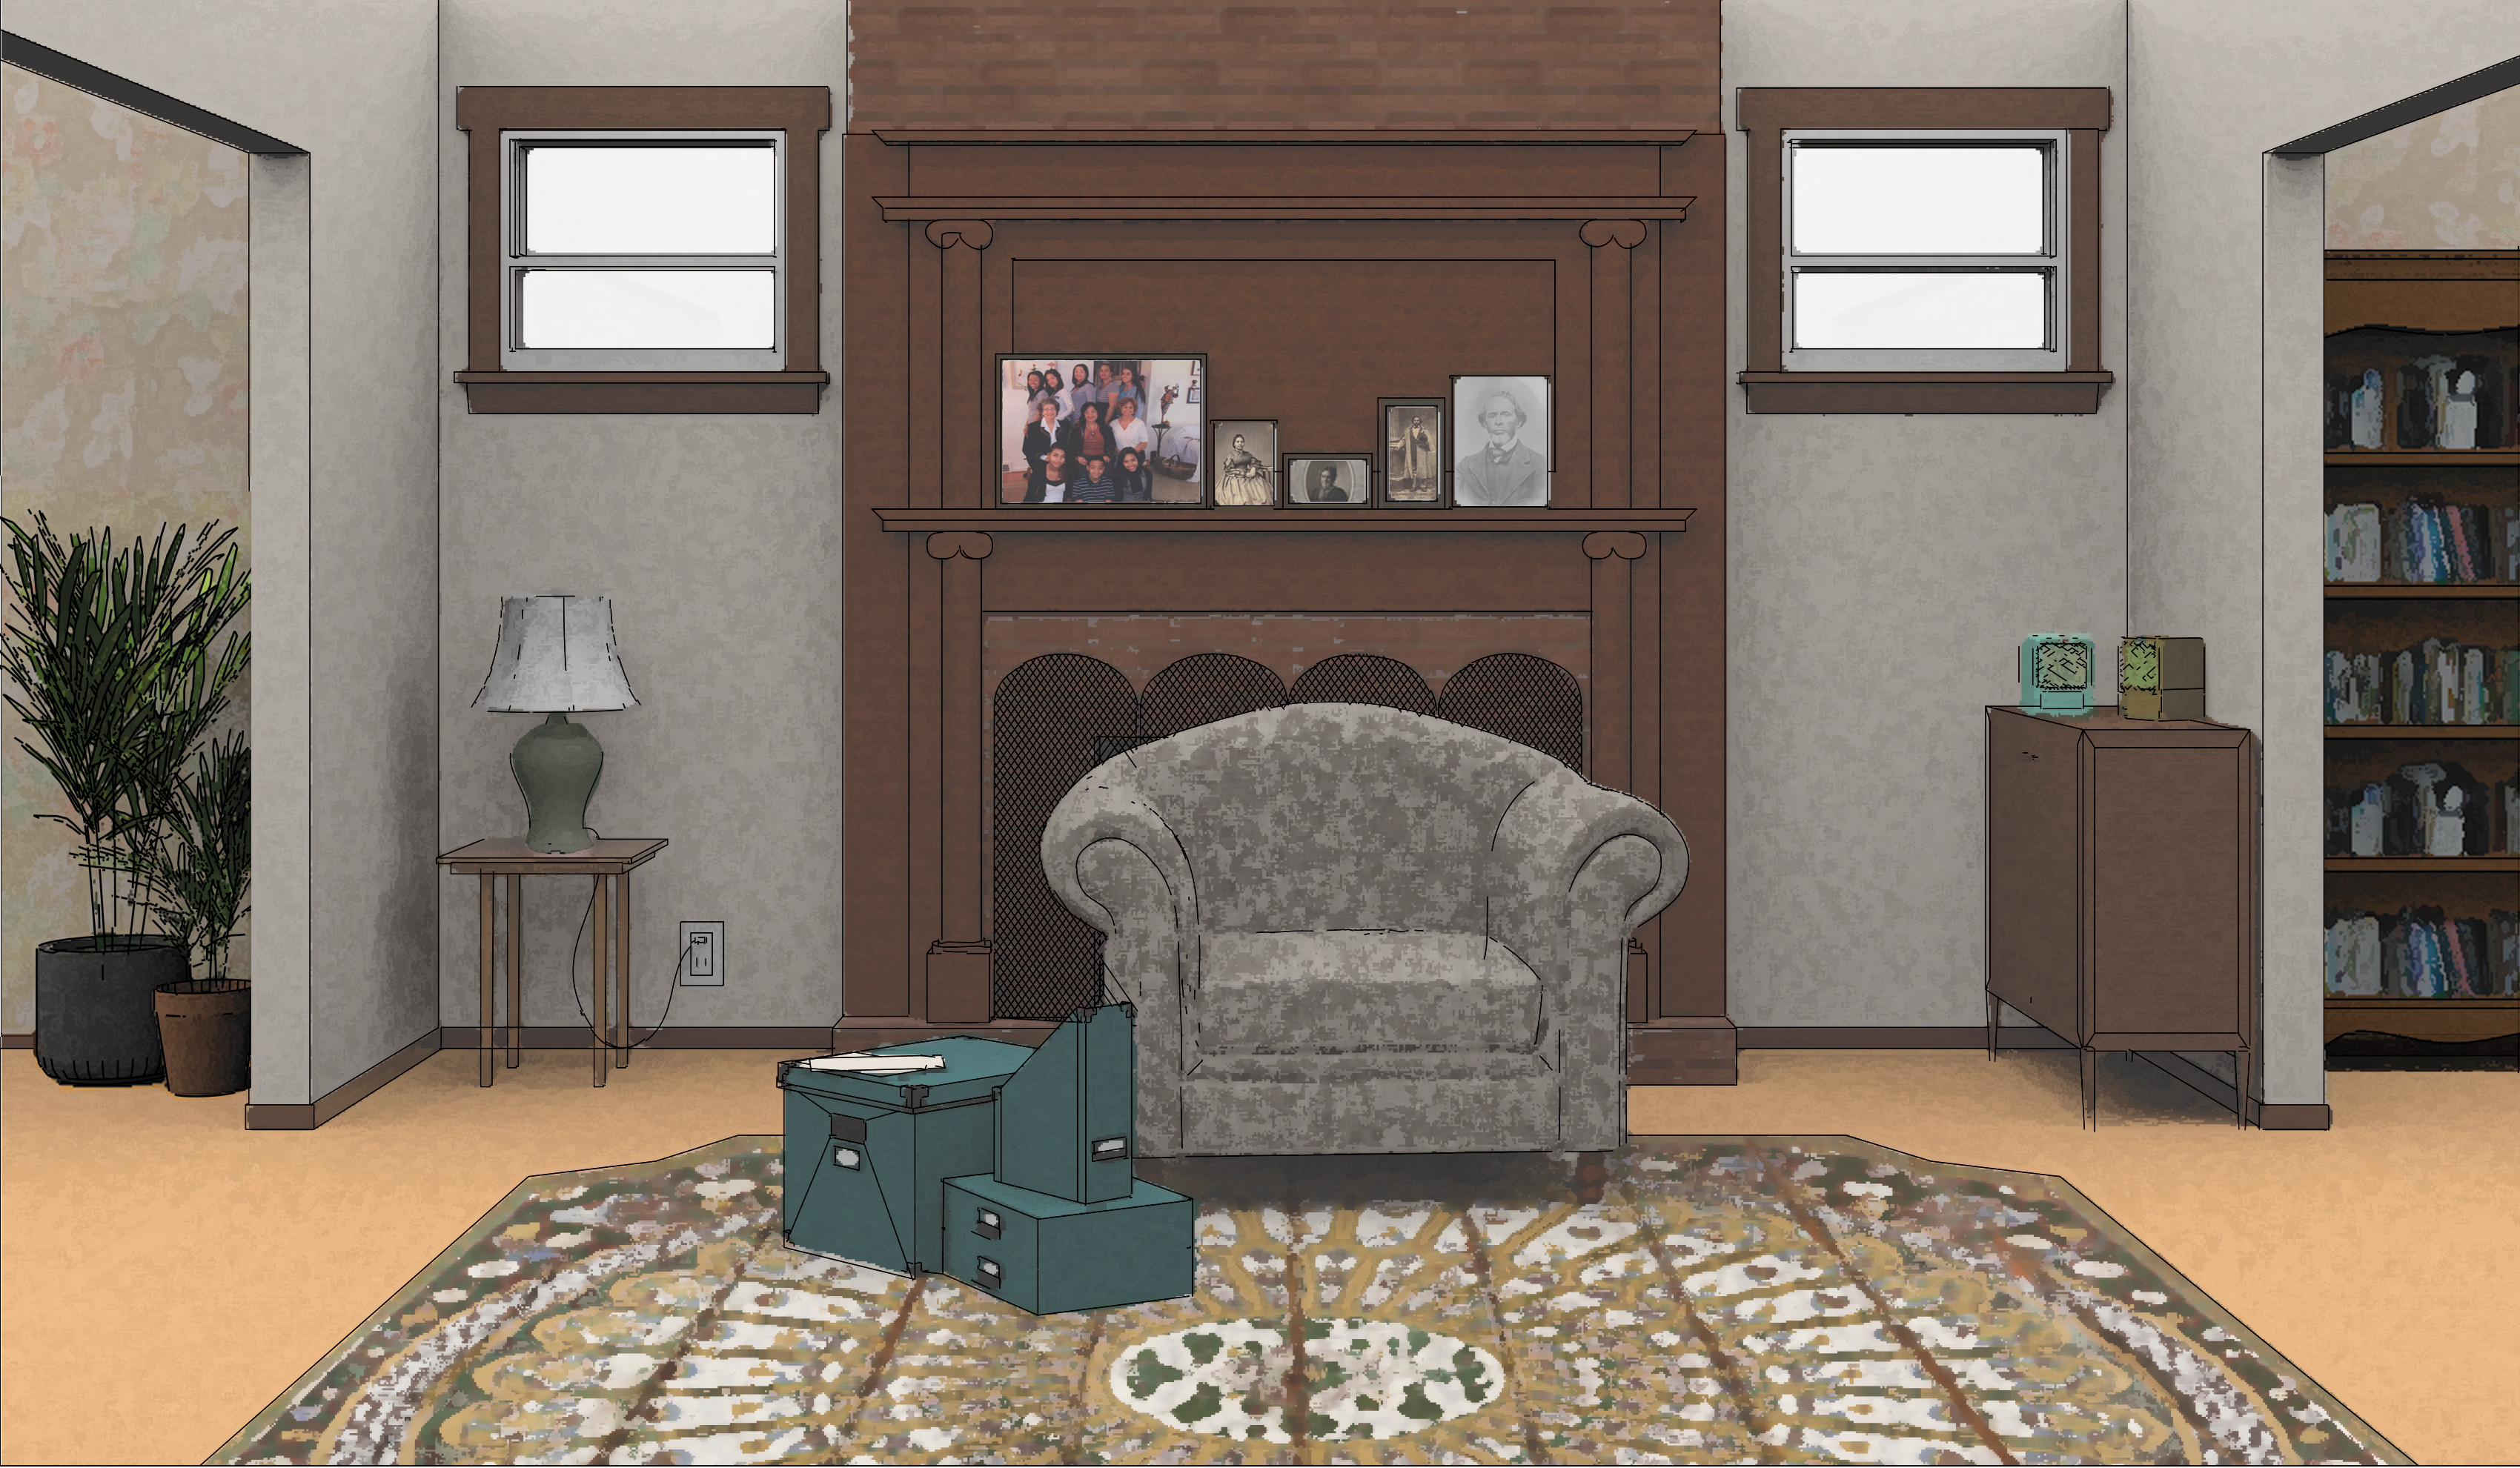 A decorative image of a living room, containing furniture, photos on the mantel, boxes of archives, and a radio